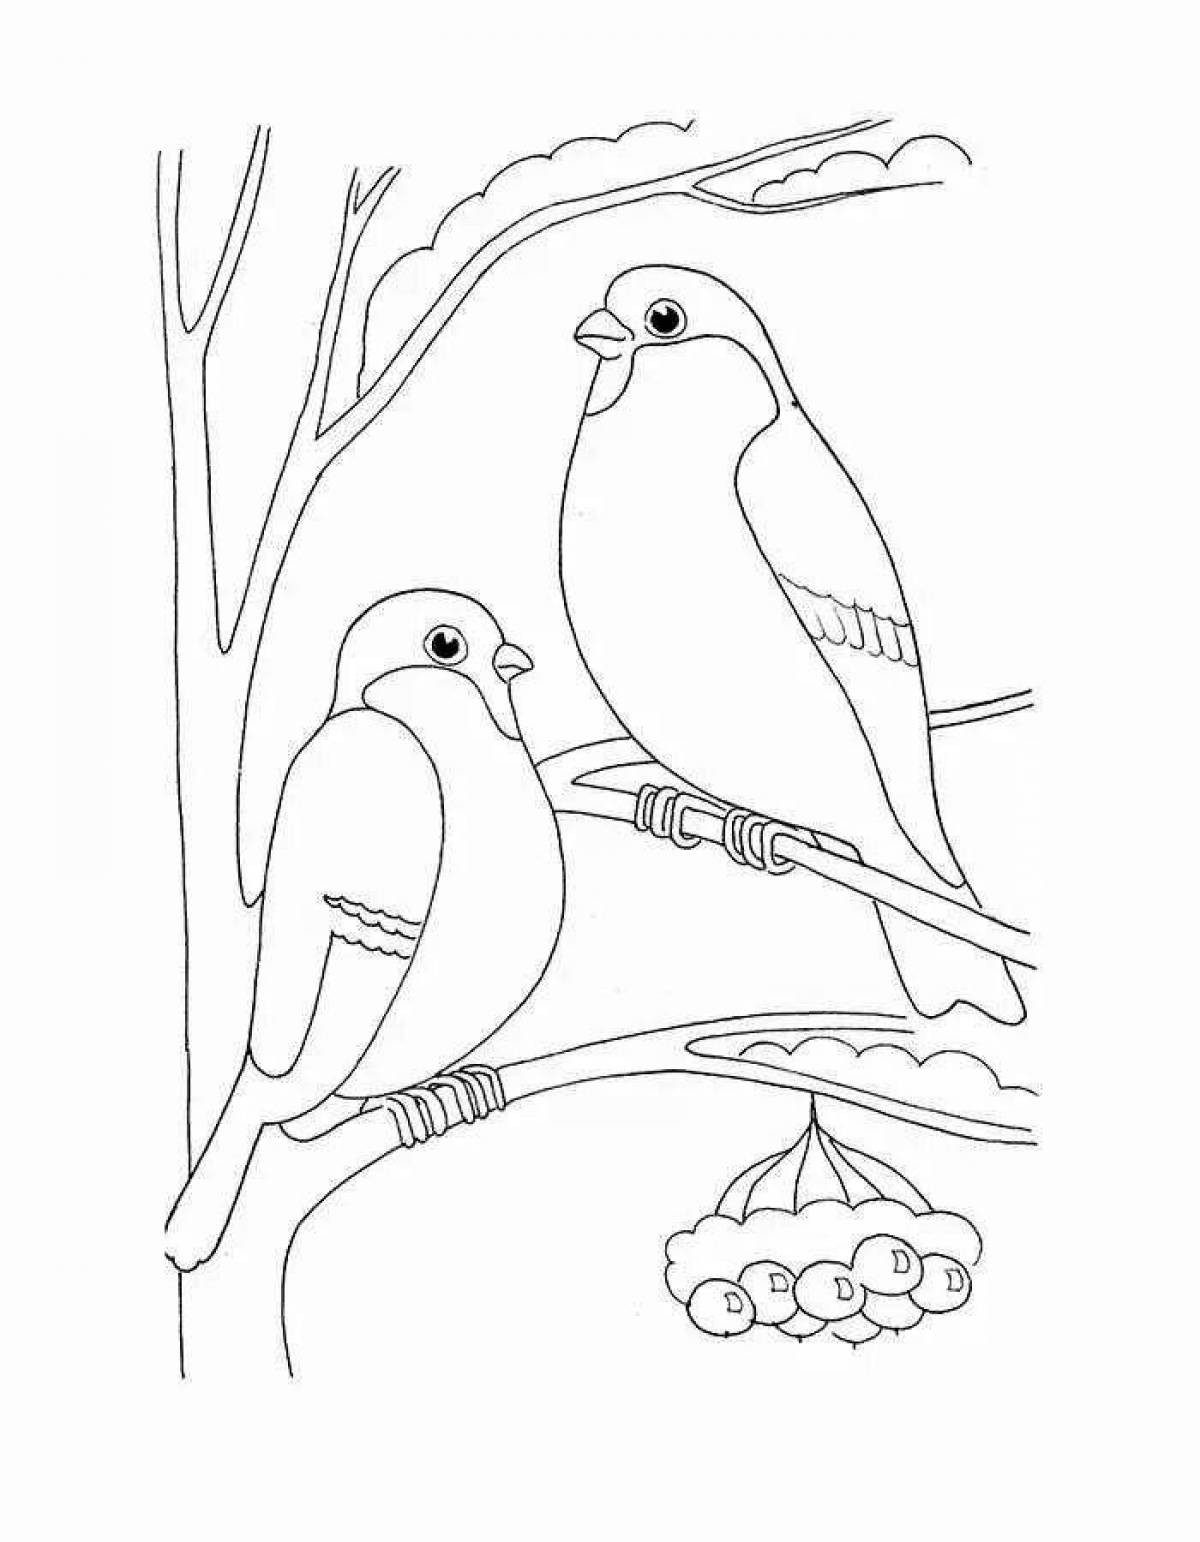 Colouring bullfinch for children 6-7 years old